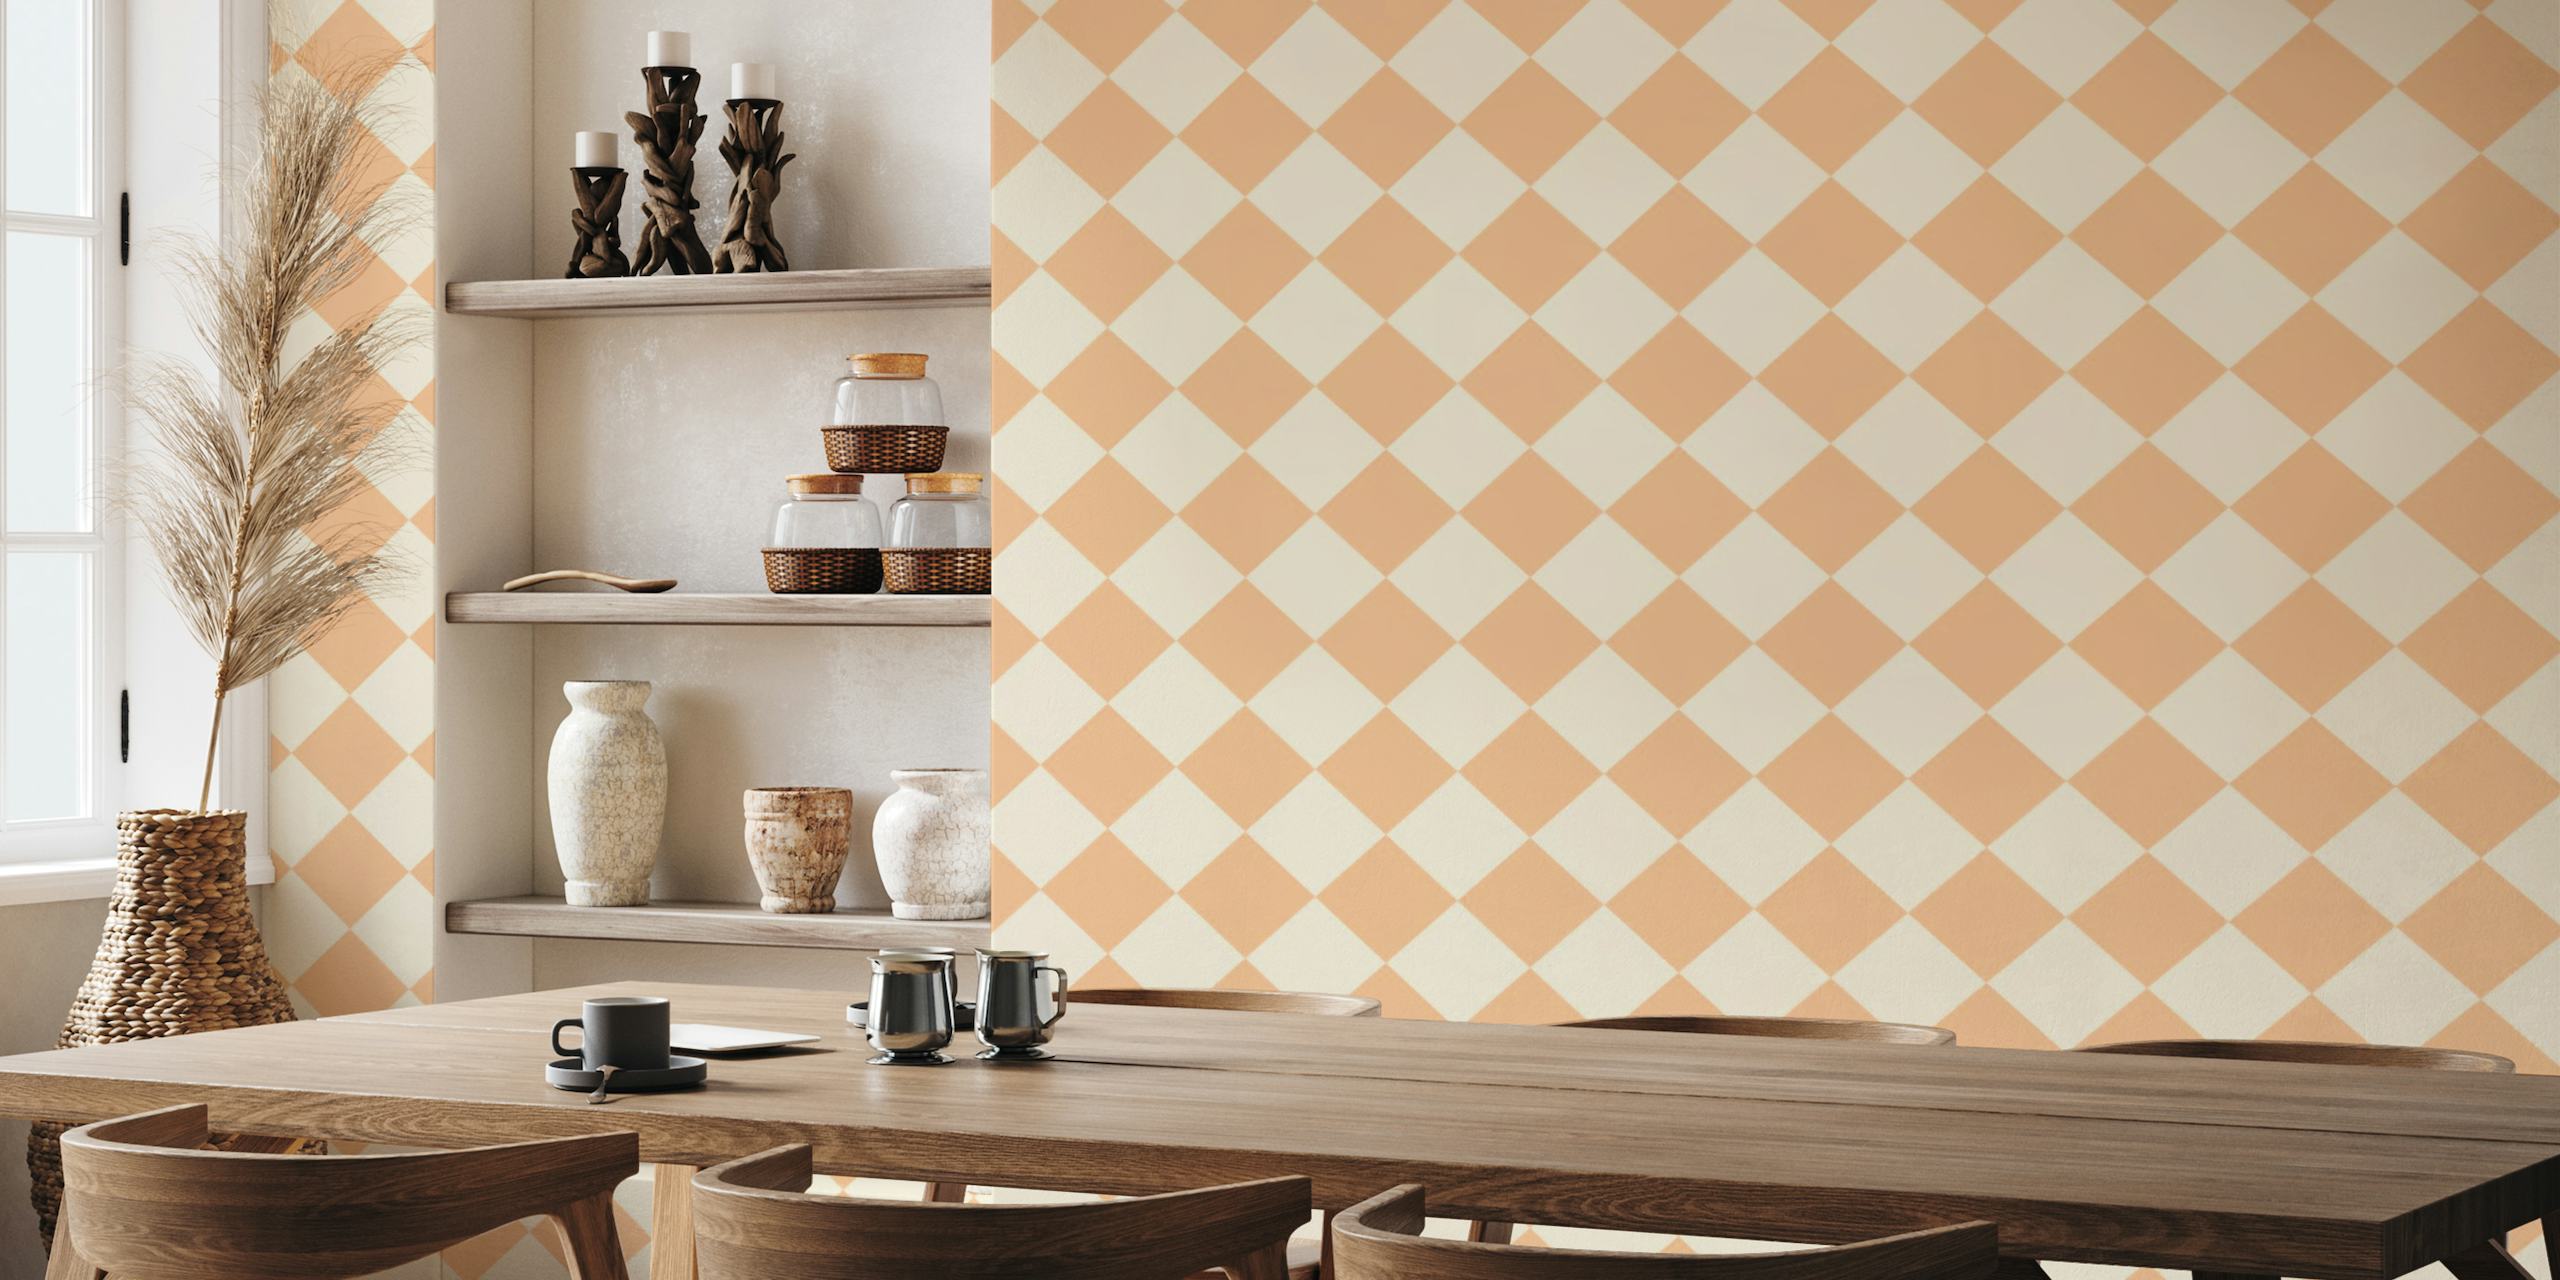 Large diagonal checkerboard pattern wall mural in peach and cream color